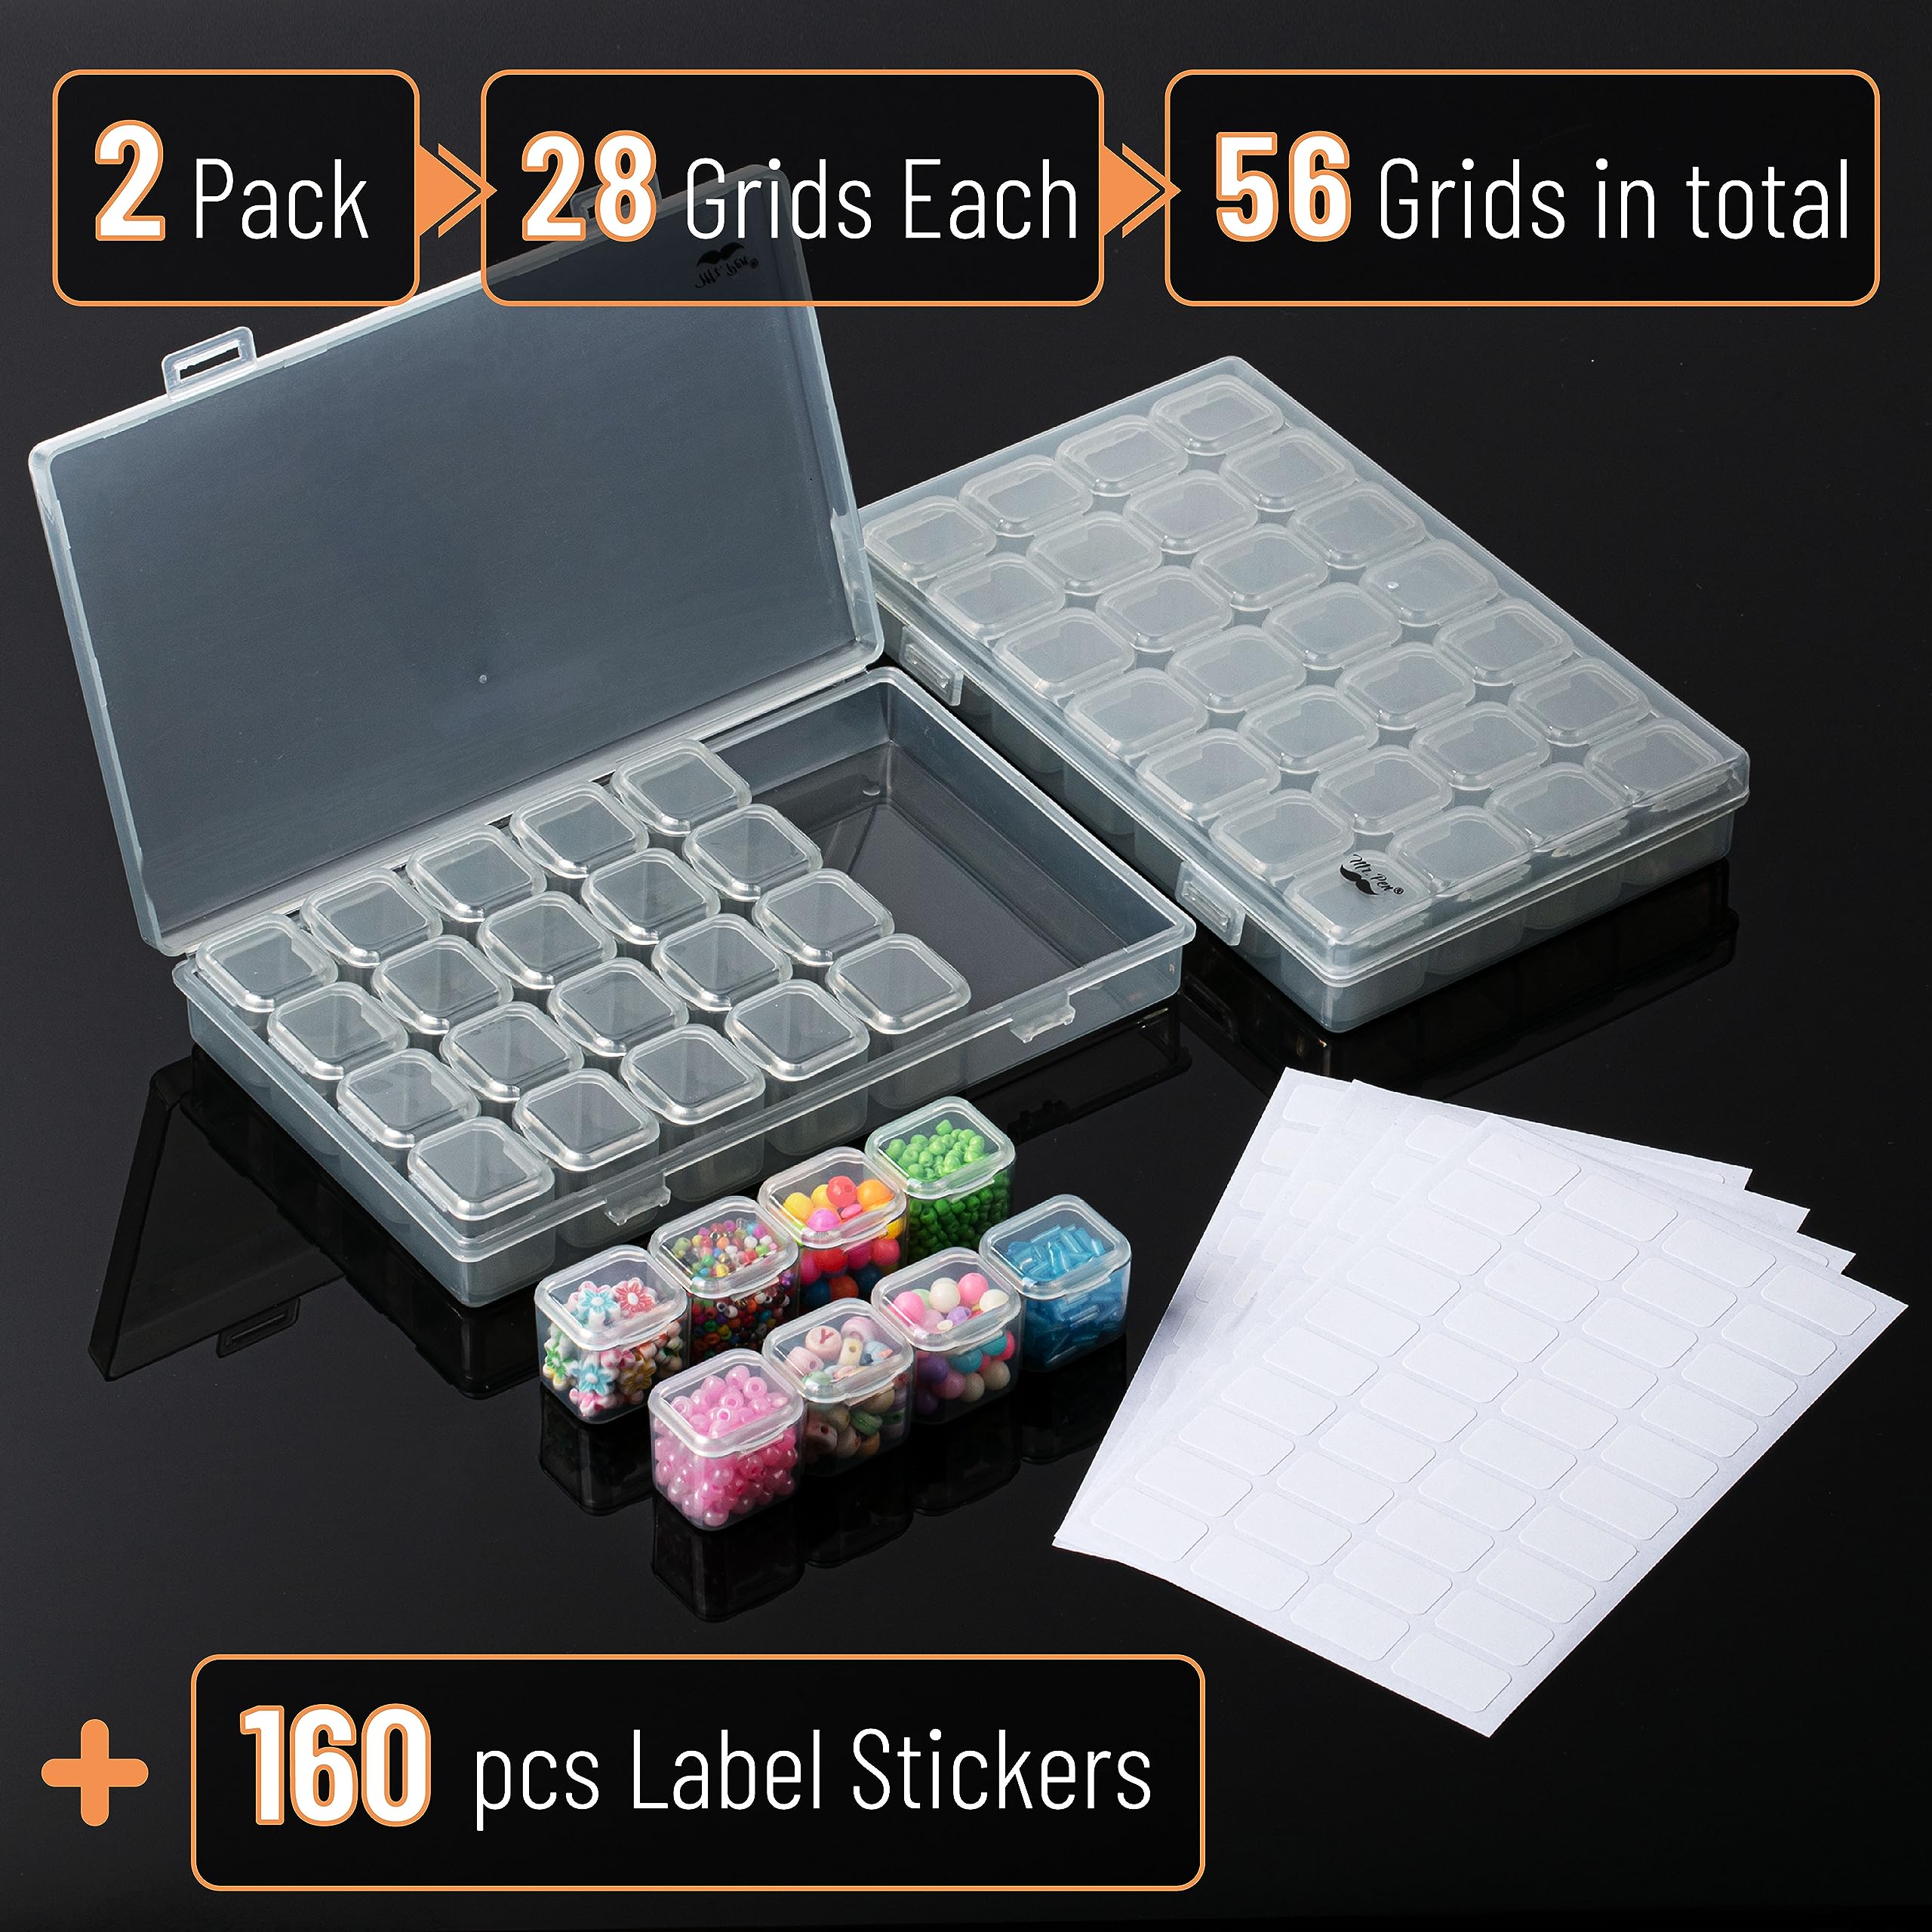 Buy Mr. Pen-Bead Storage Containers, 28 Grids, 2 Pack, Grey